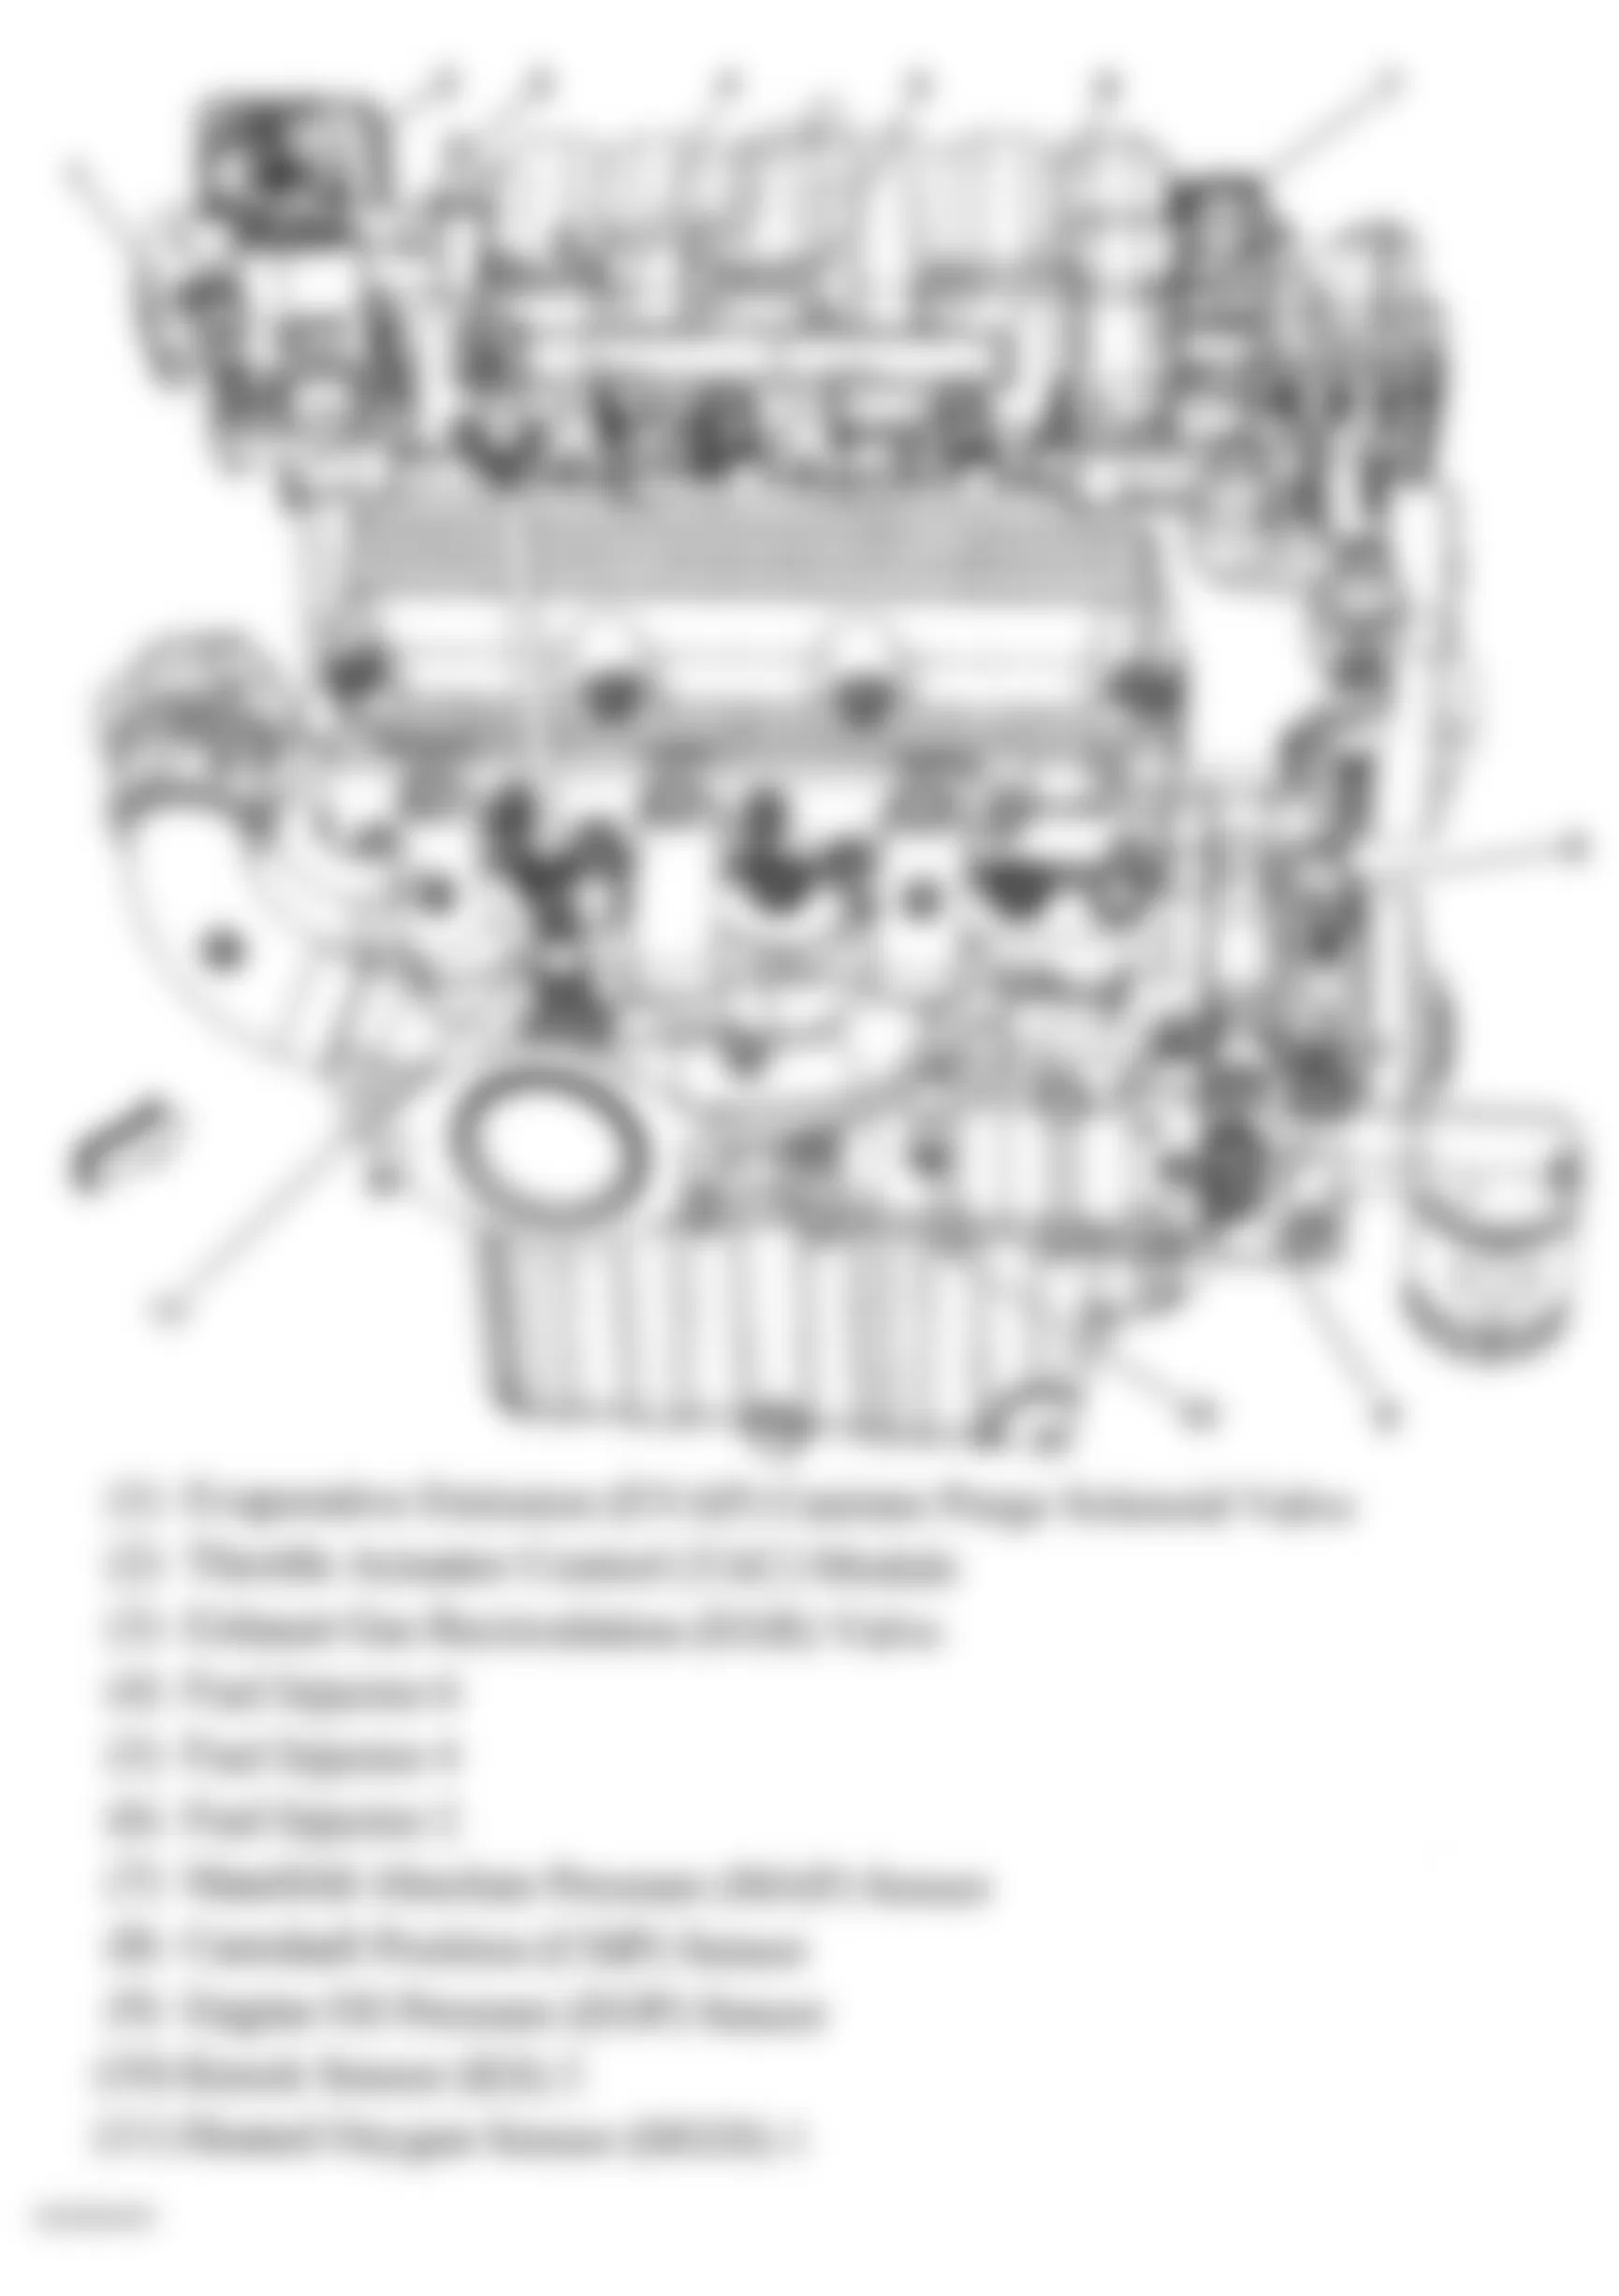 Buick LaCrosse CXS 2006 - Component Locations -  Right Side Of Engine (3.8L)